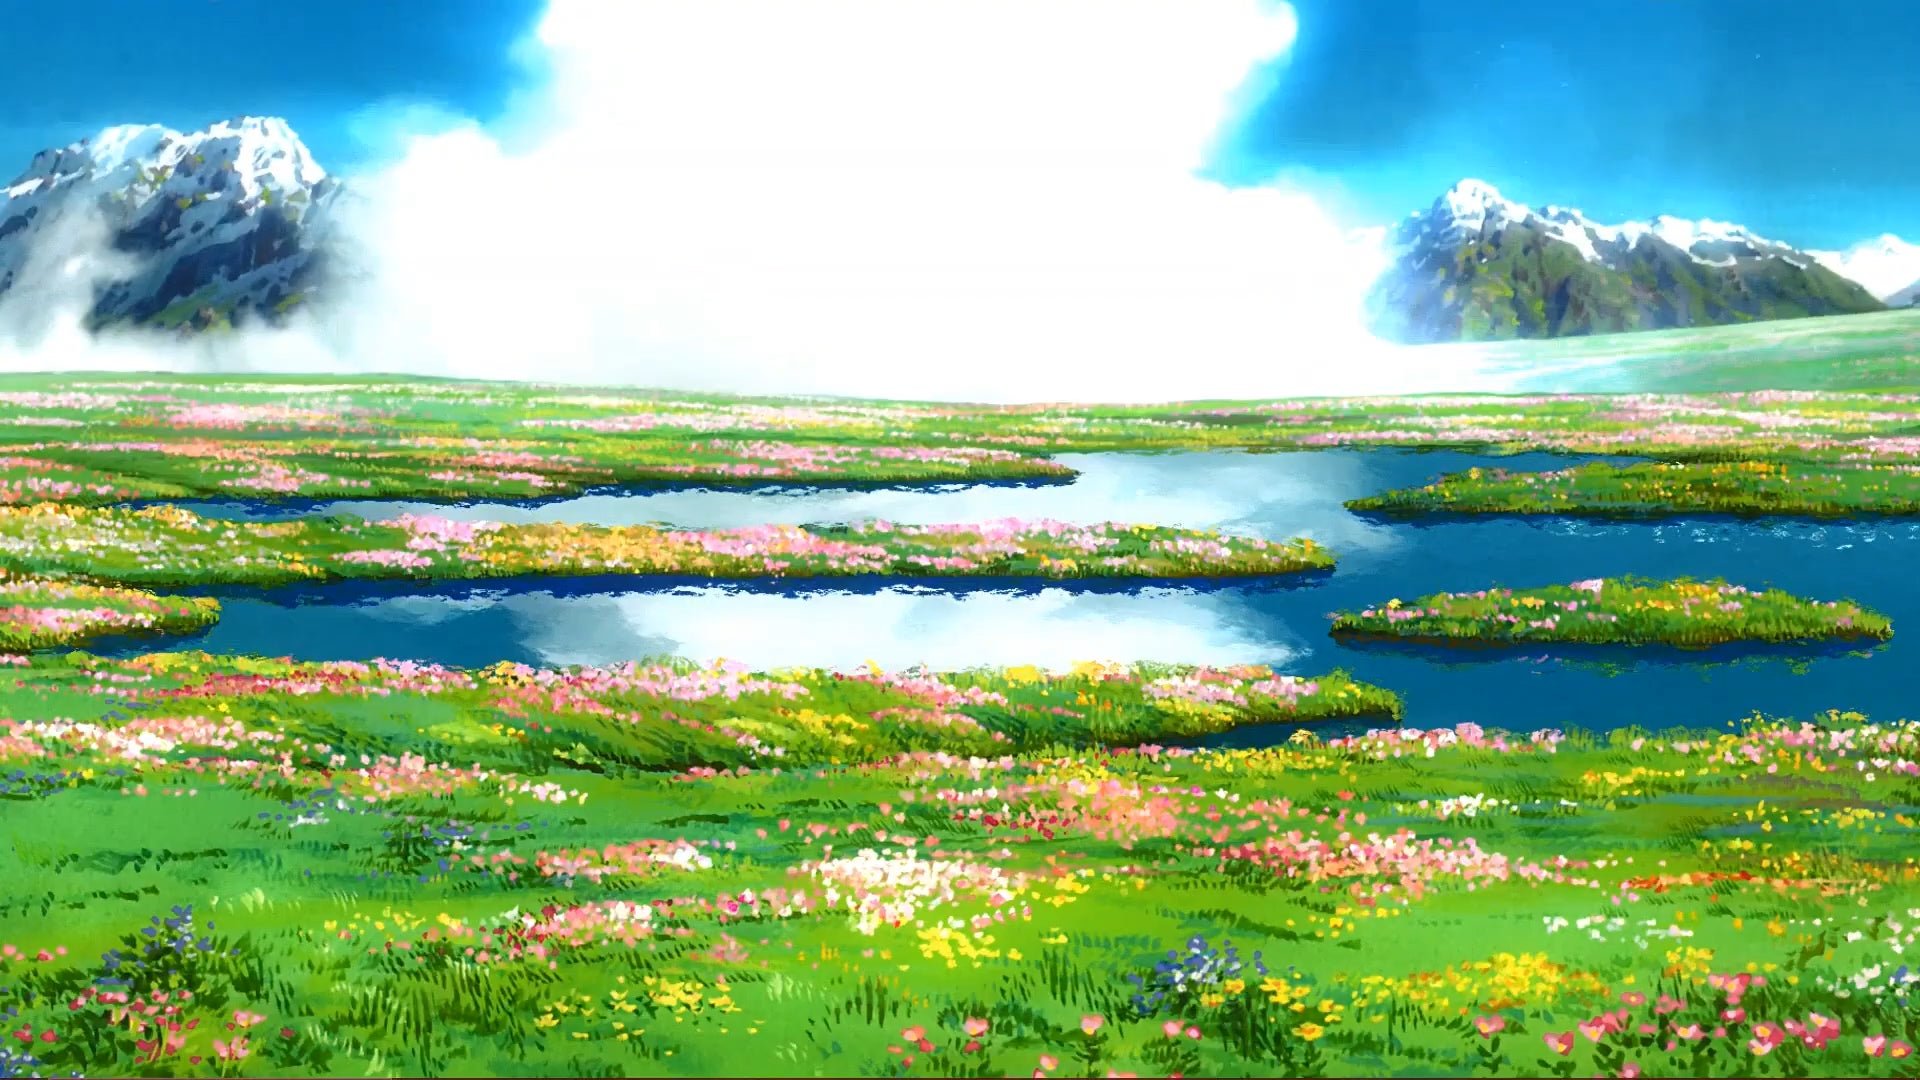 1080p] Howl's Moving Castle Backgrounds